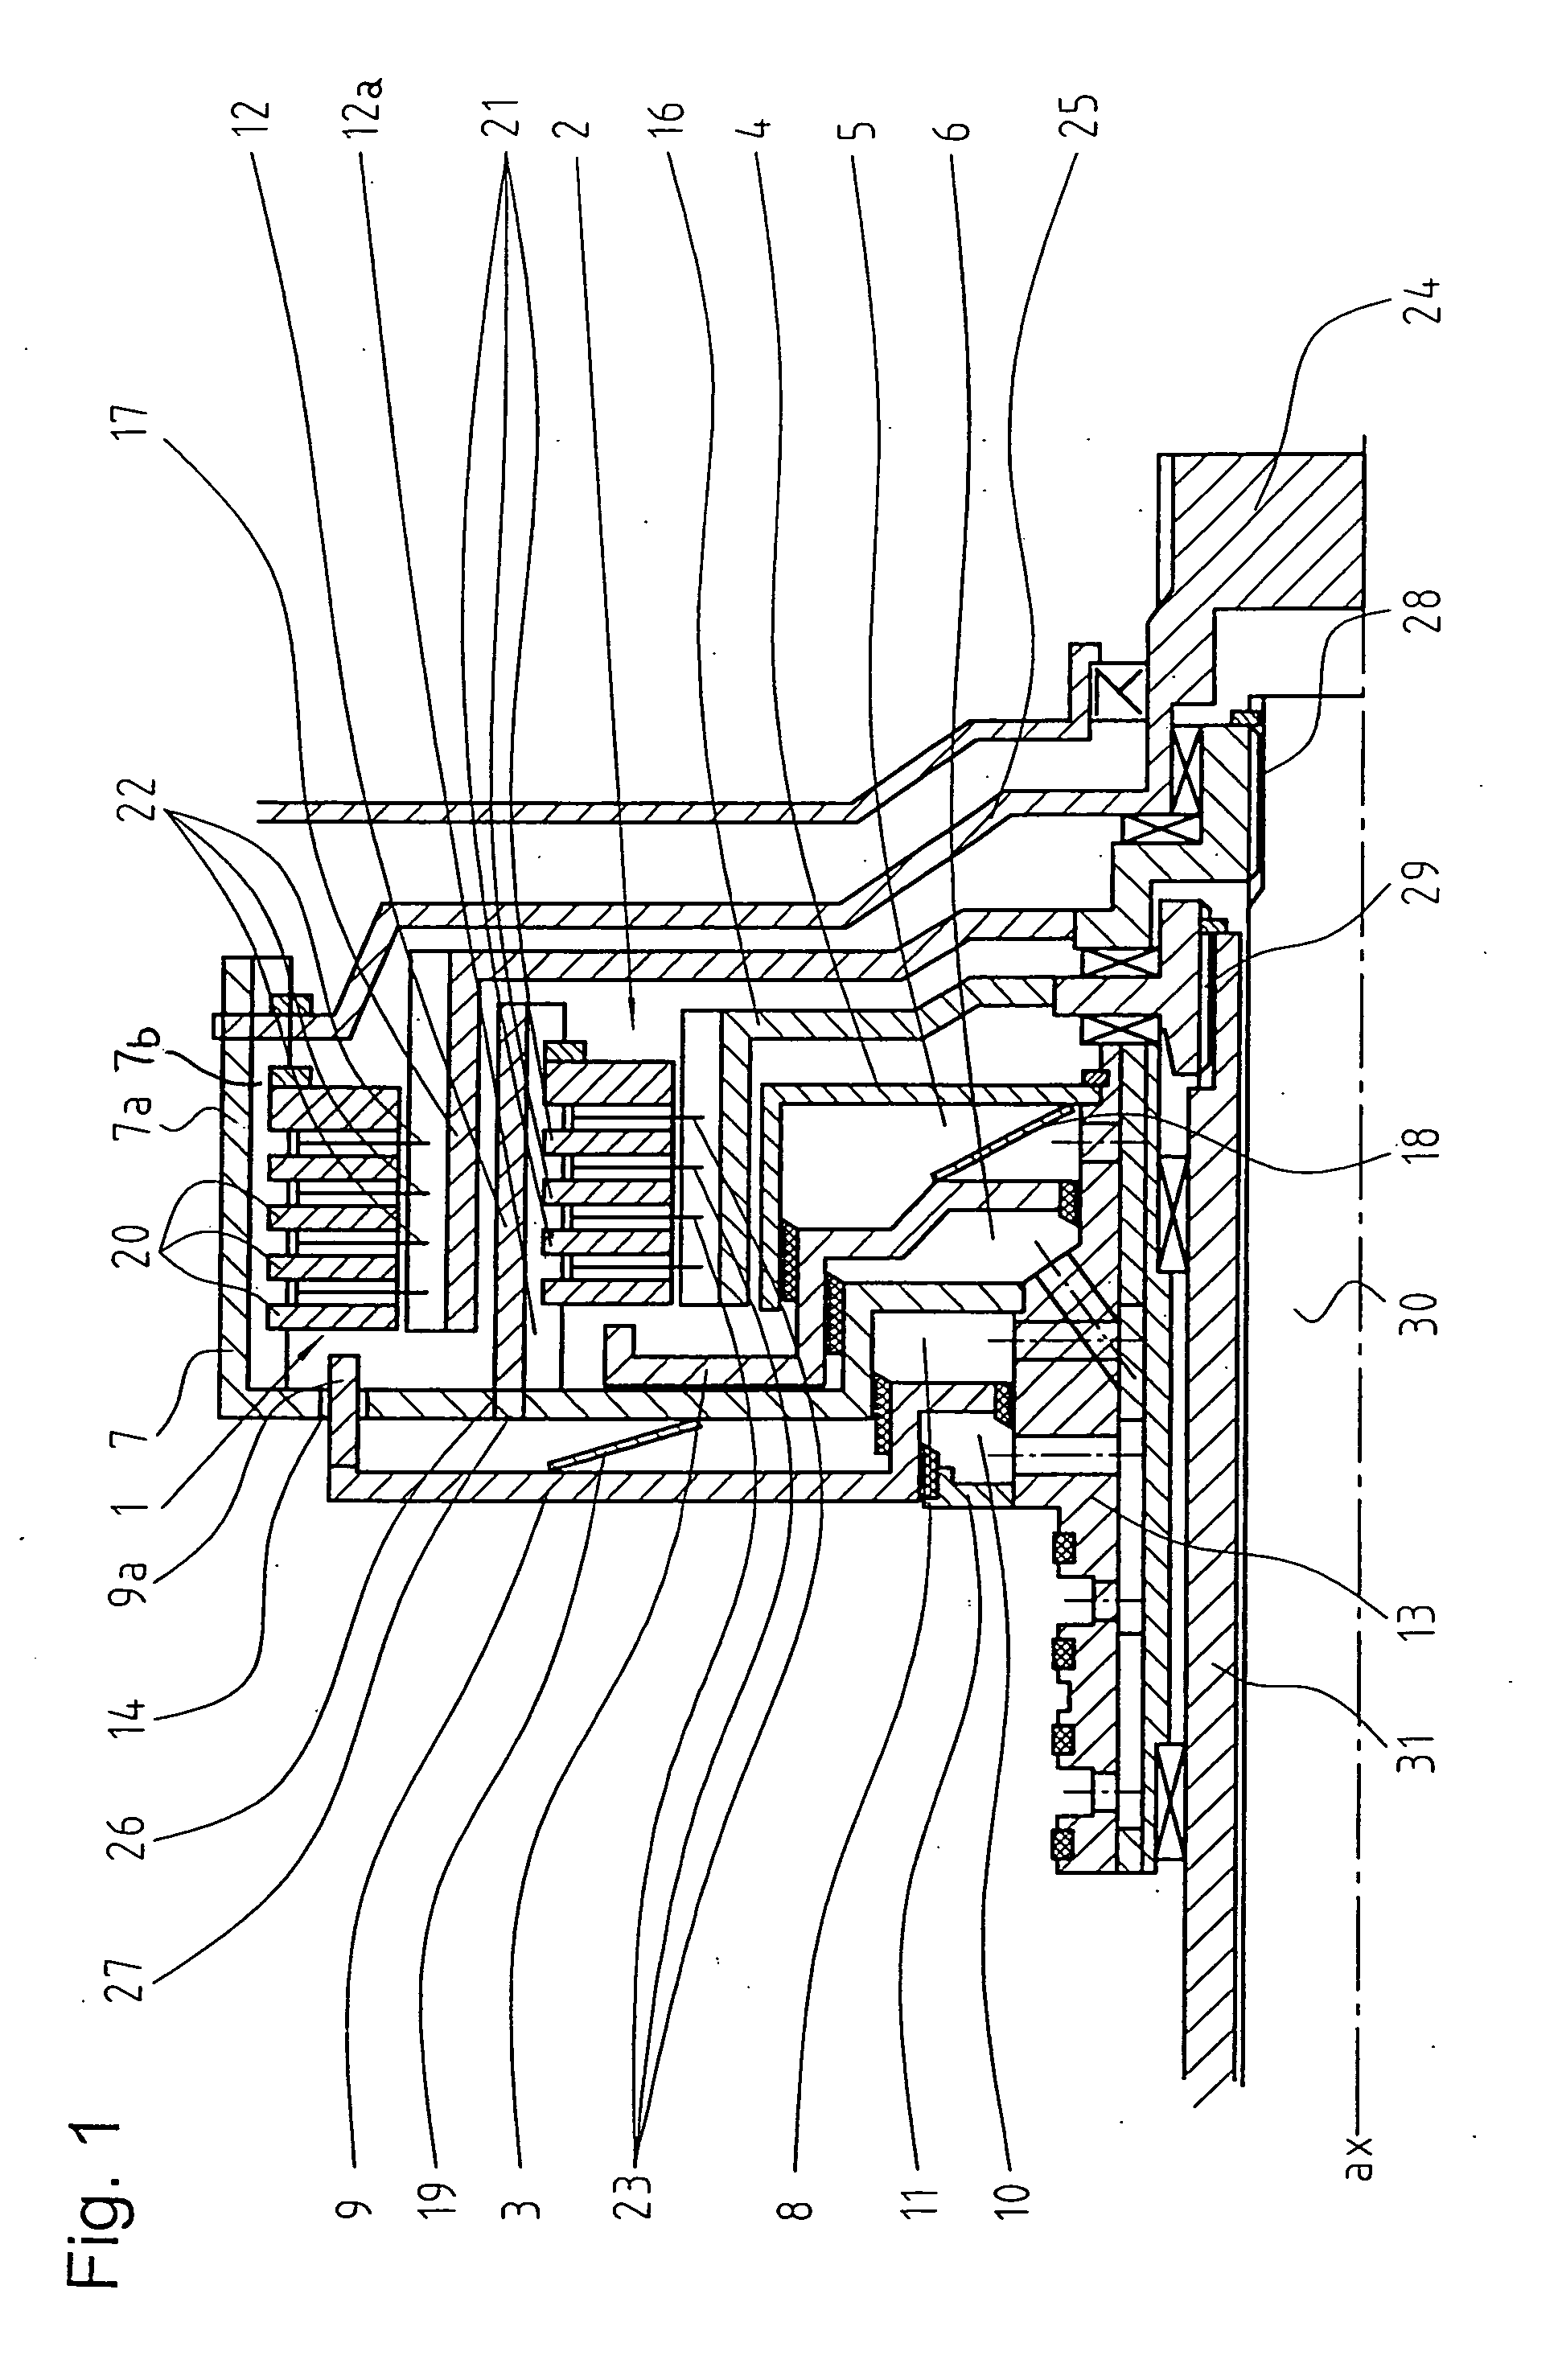 Dual clutch transmission with radially nested clutches having a common disk carrier